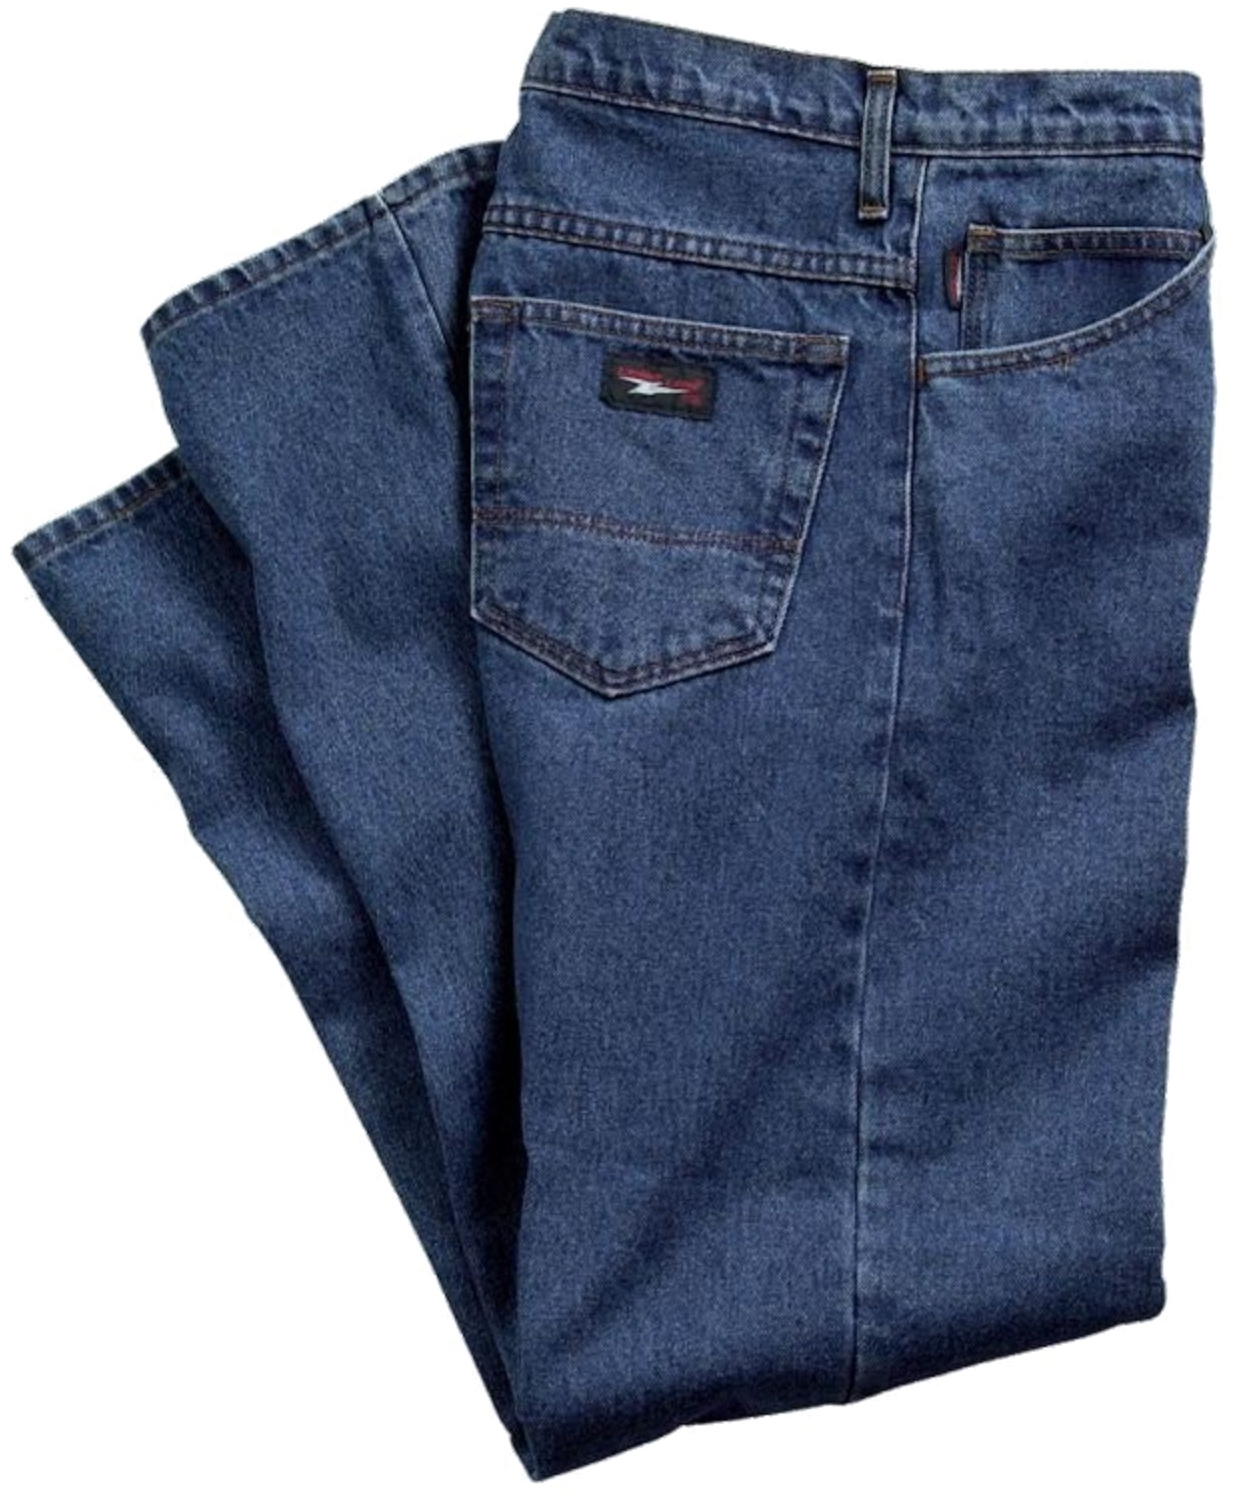 Classic Blue Jeans Folded PNG image